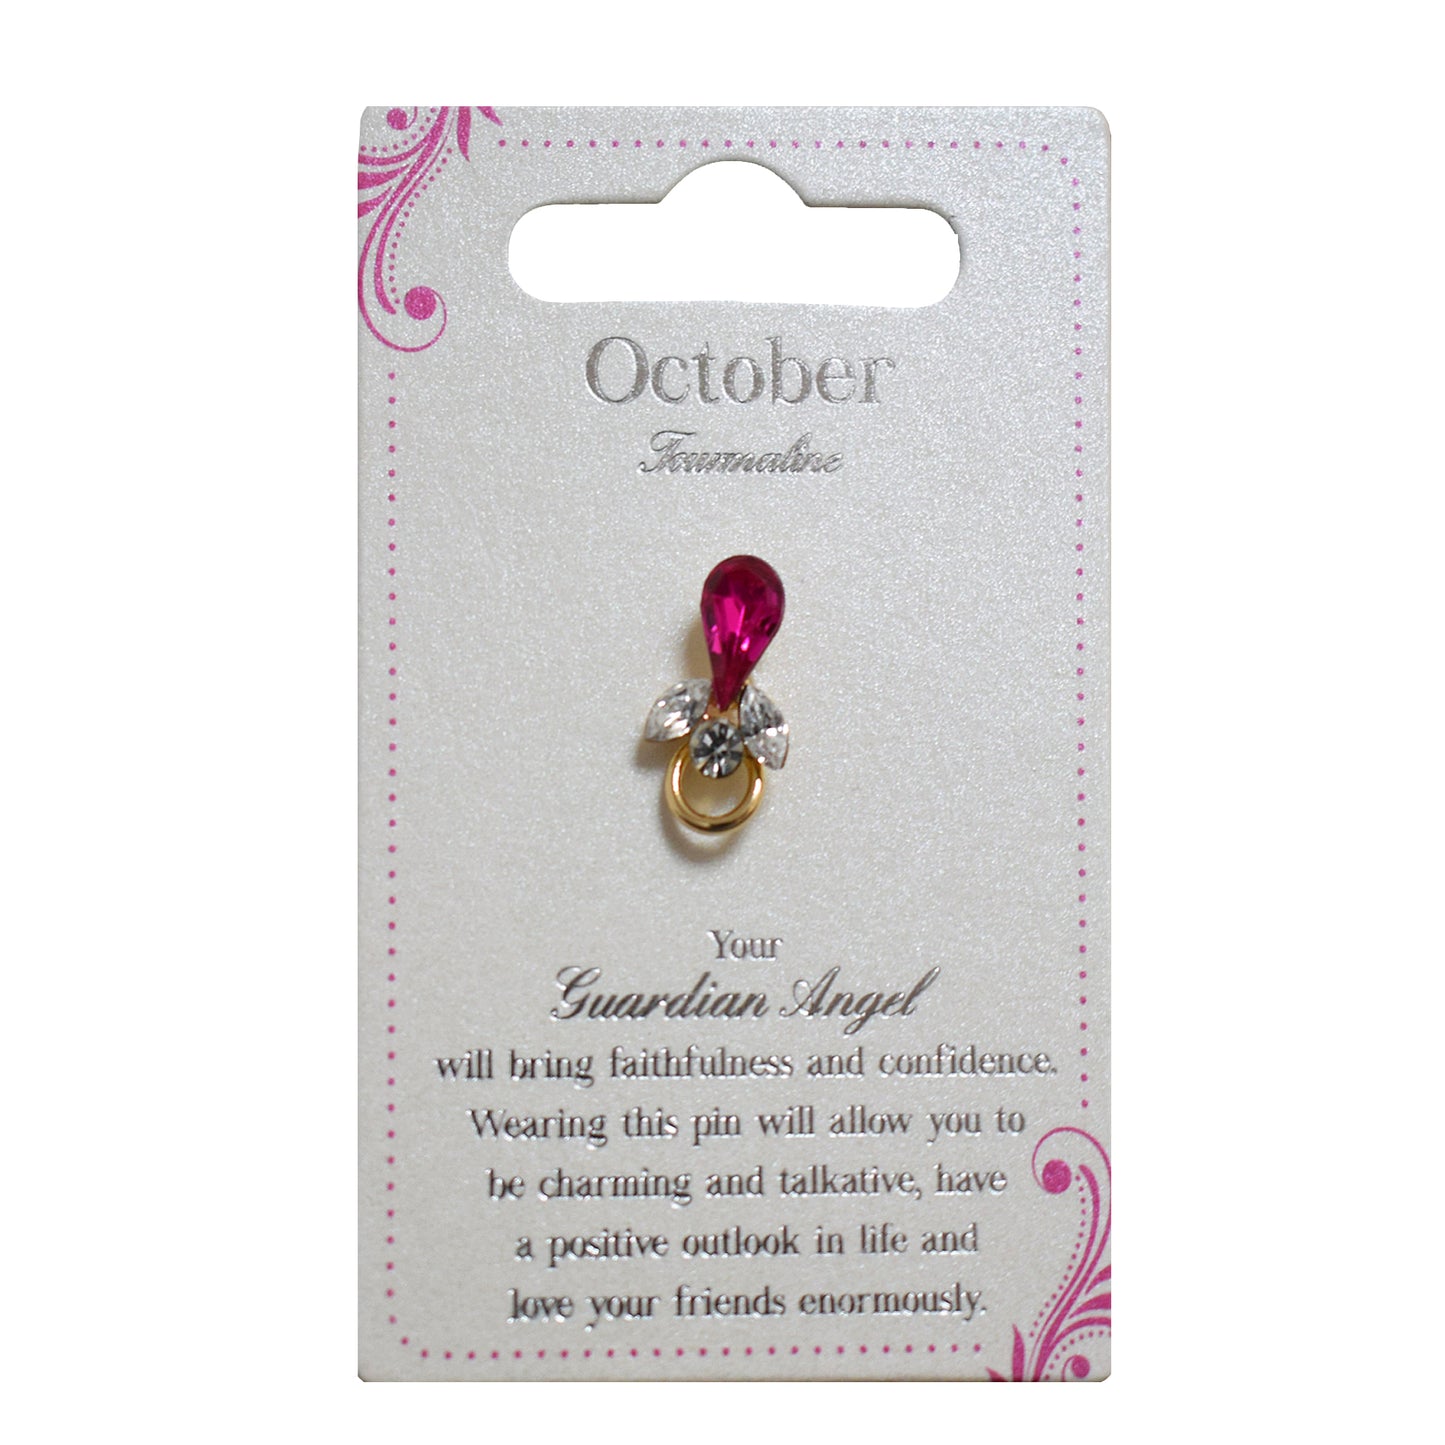 Guardian Angel October Birthstone Angel Pin With Gem Stone